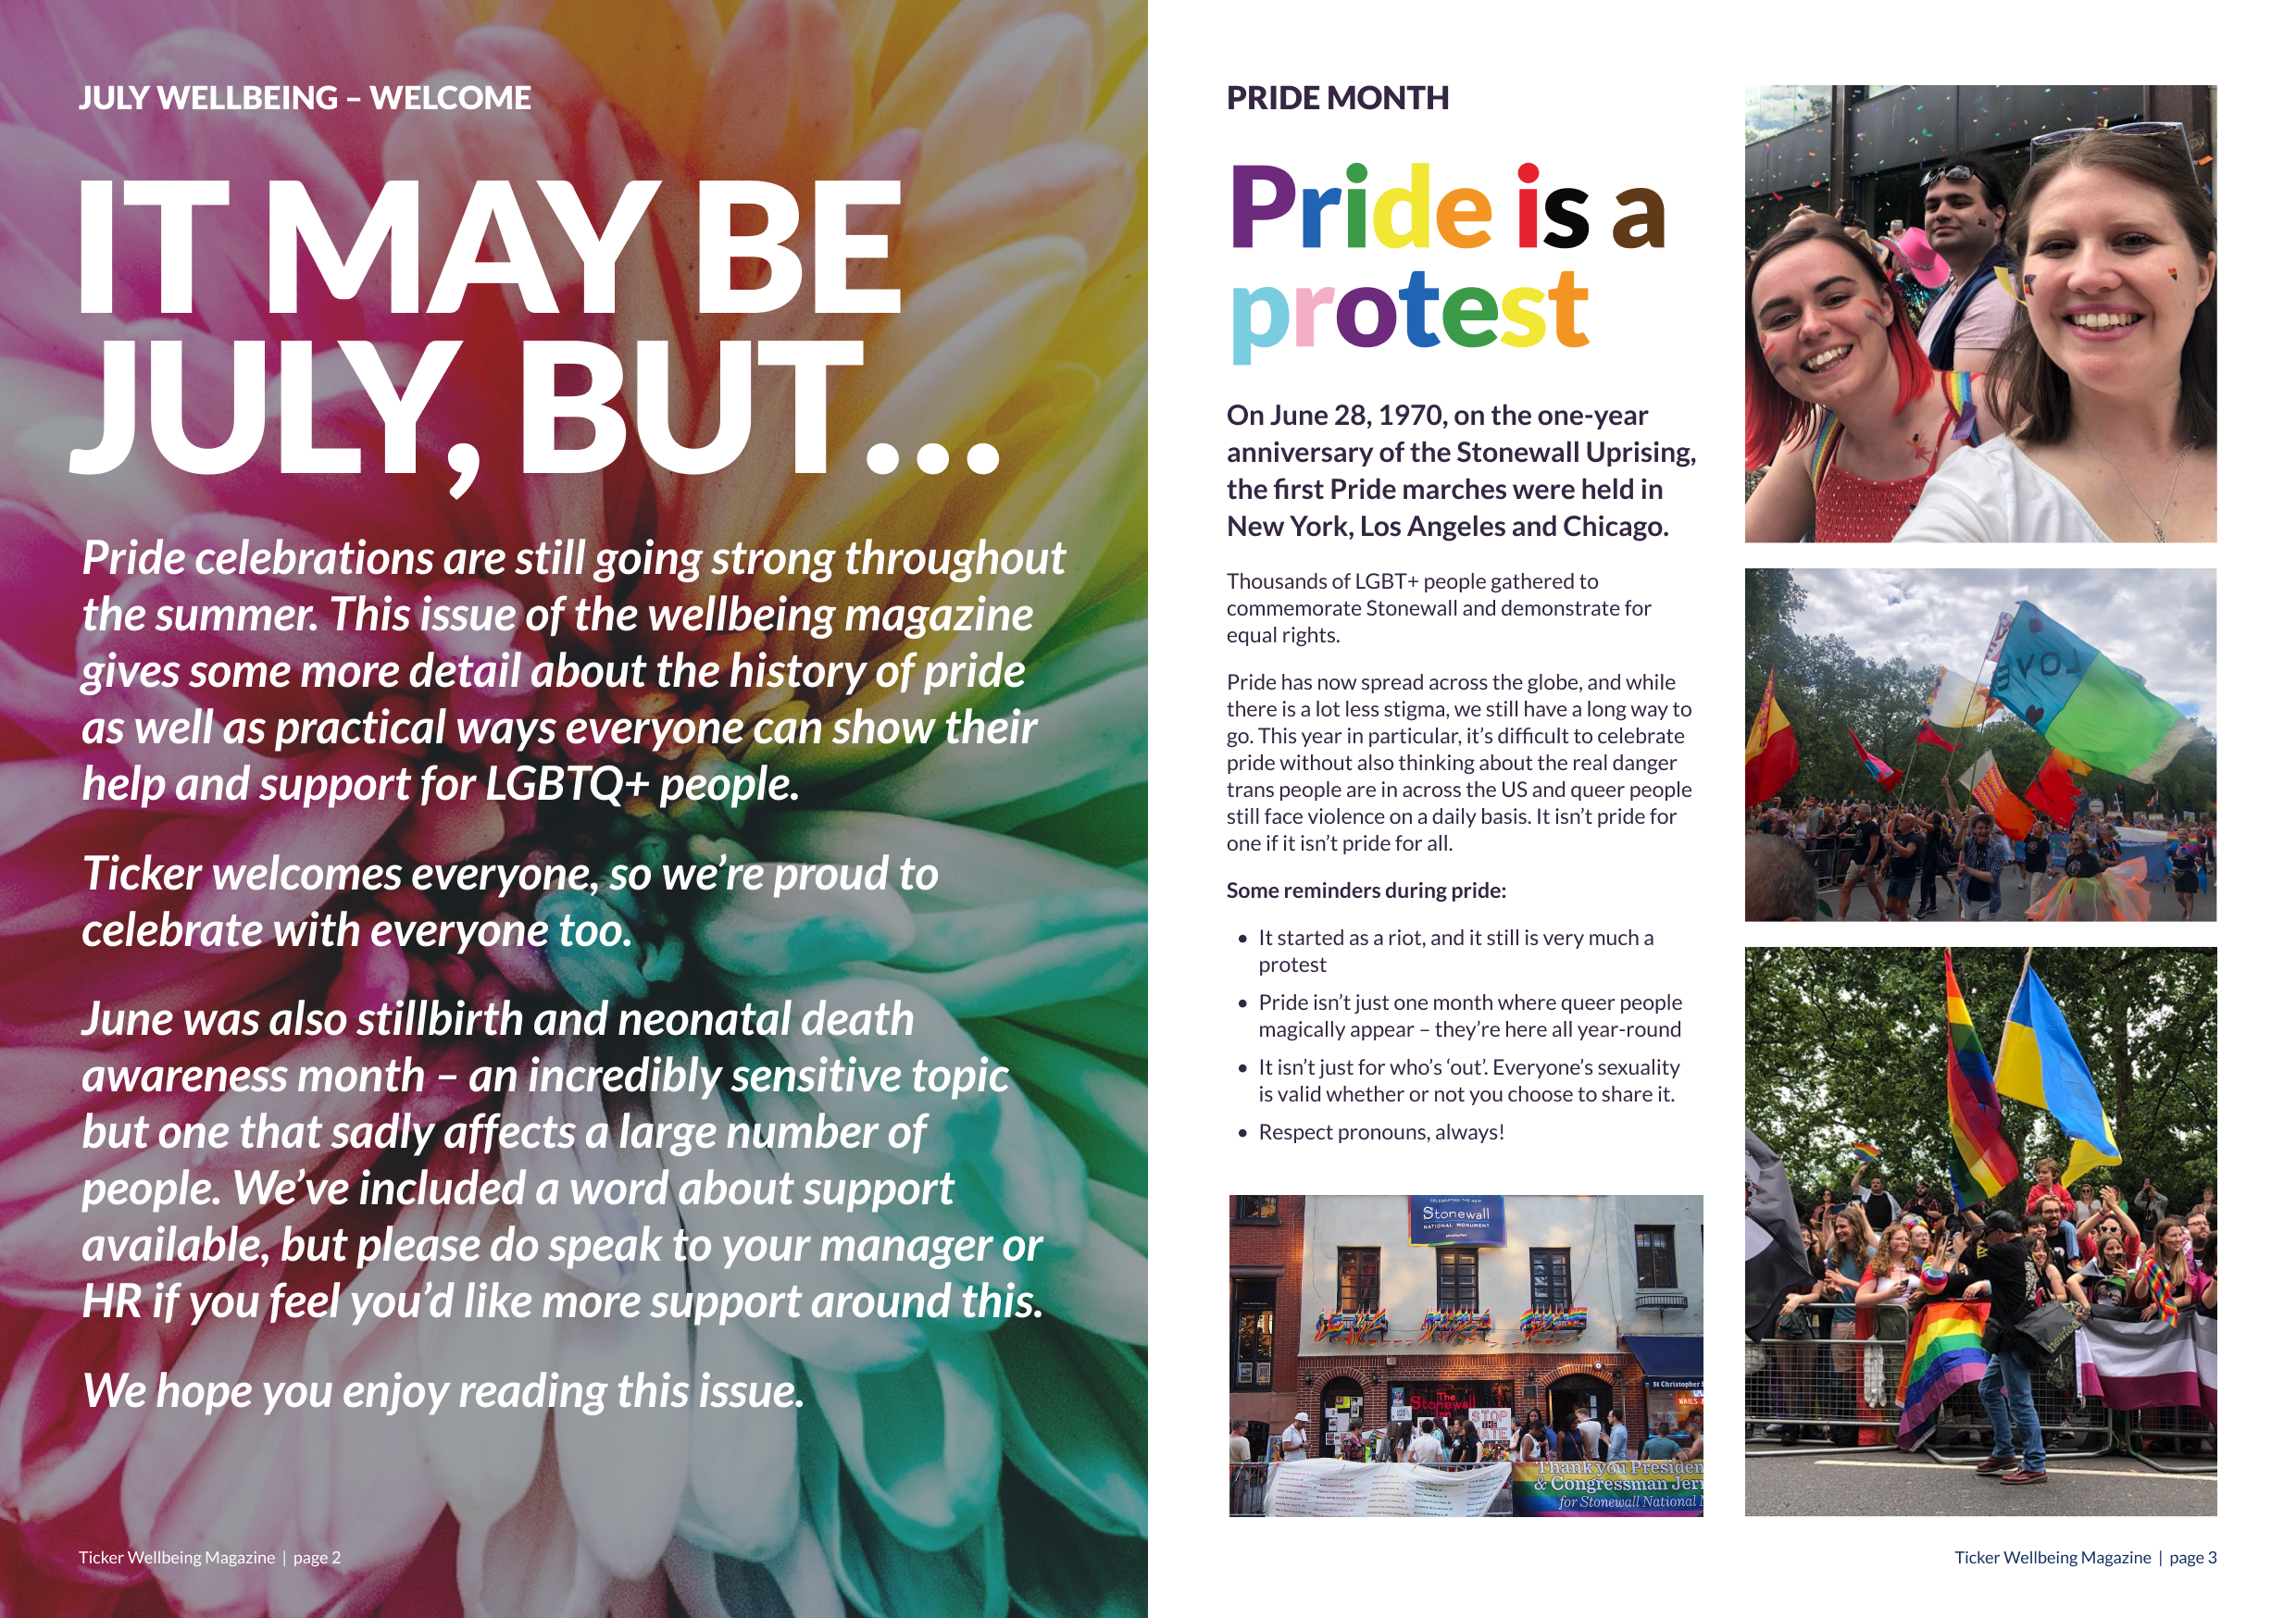 Colourful two-page magazine spread featuring a rainbow flower and text about Pride and its history. Photos from London Pride are shown on the right-hand side. 